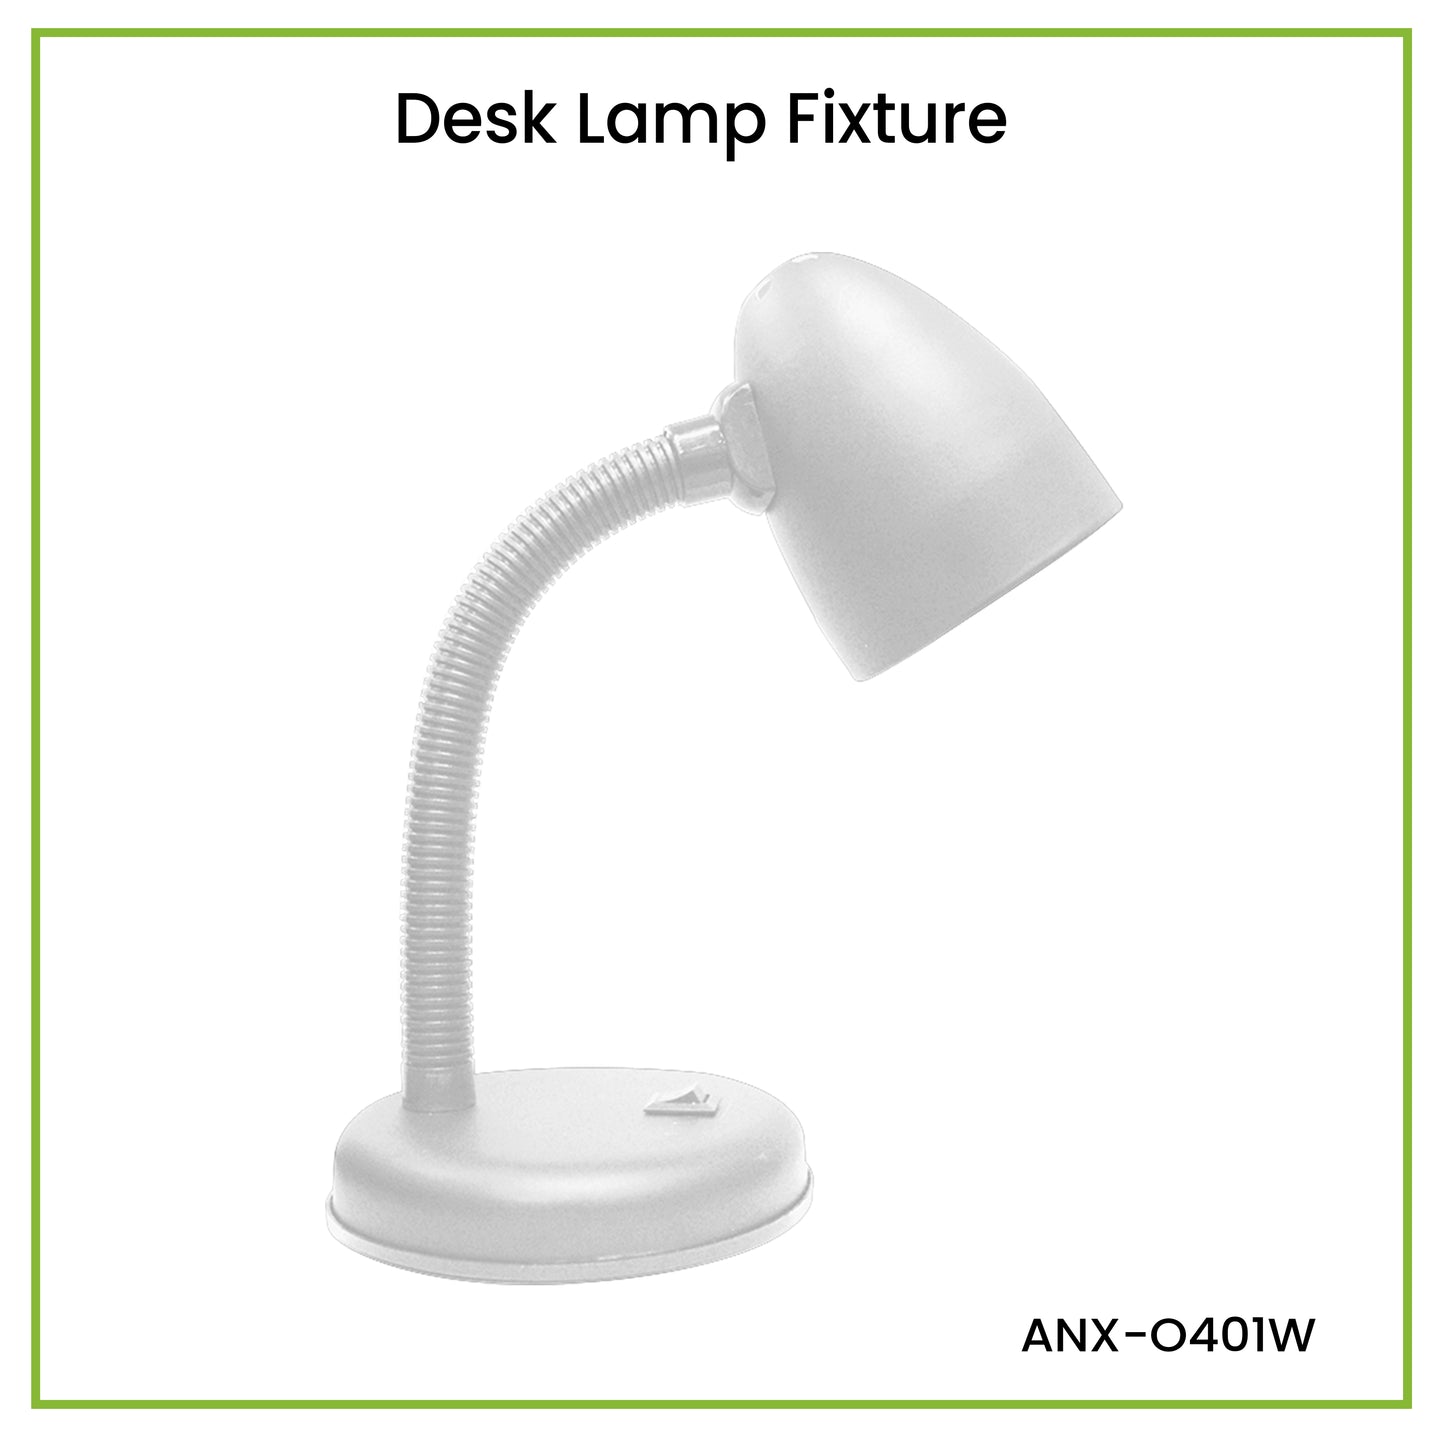 Nxled Desk Lamp Fixture With Tri-Color Bulb (ANX-O401W)